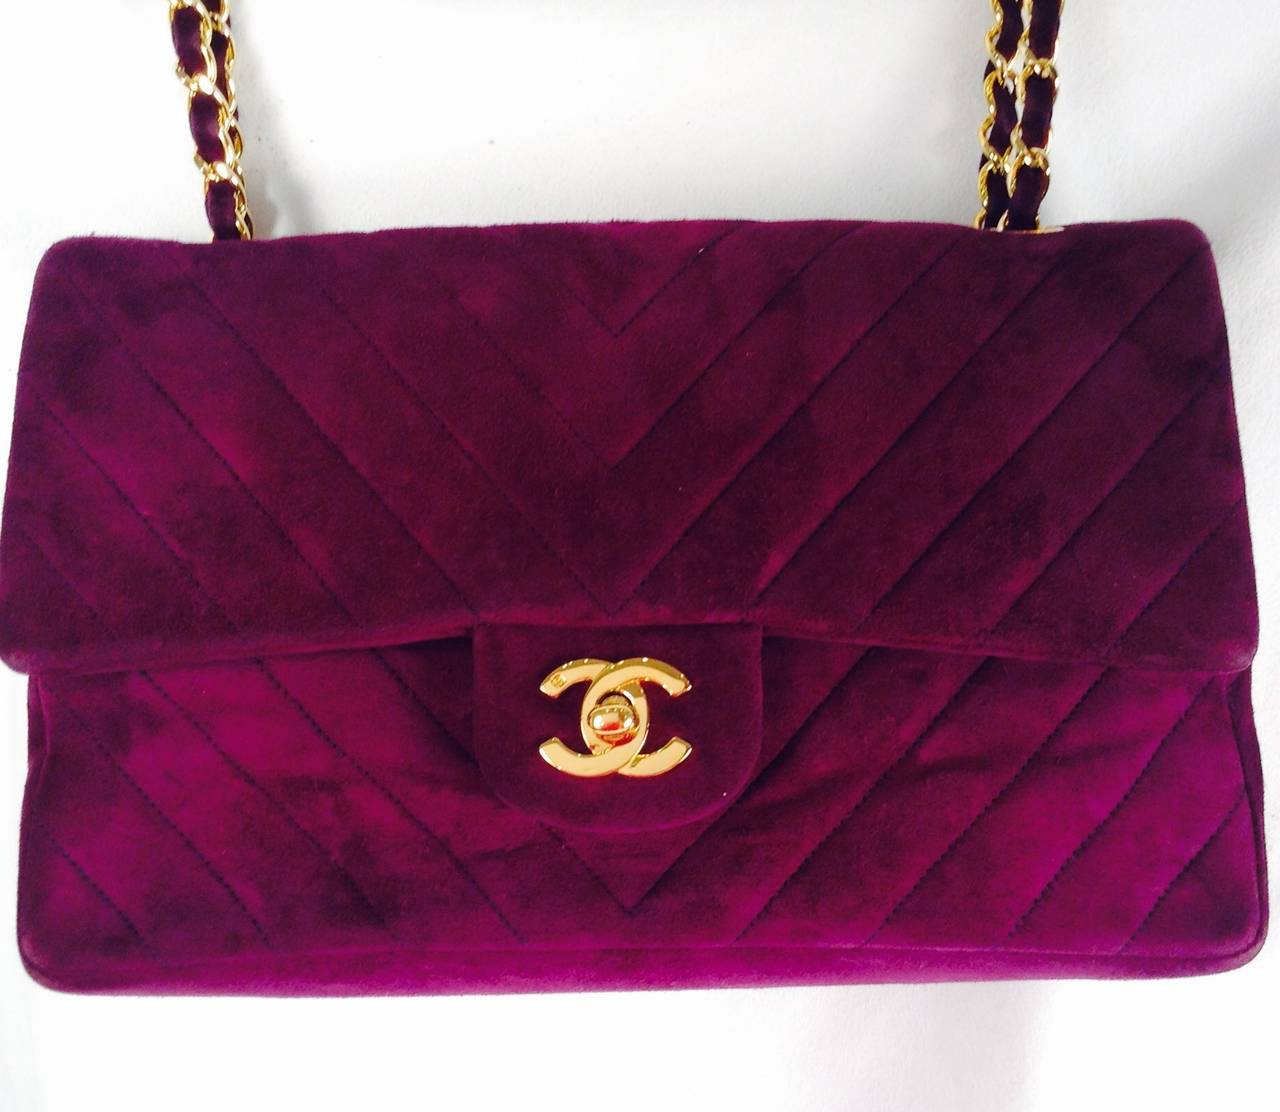 Vintage Chanel Chevron Quilted Double Flap Bag was crafted between 1989 and 1991 and is sure to please even the most discerning Chanelophile!  Exquisite plum, fit for any royal, is exalted in luxurious suede and leather.   It's all here..double